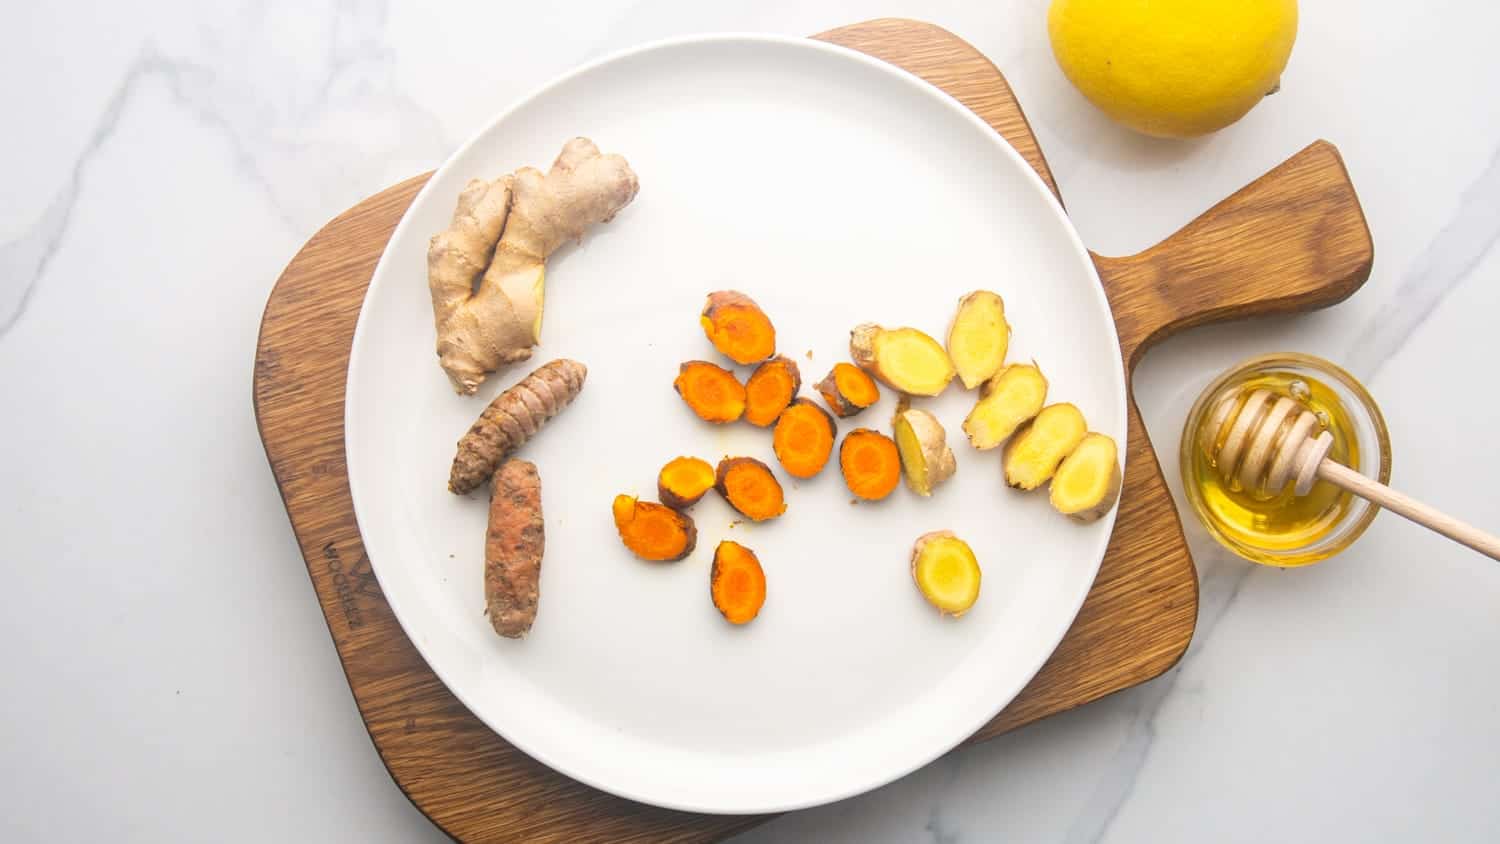 Sliced ginger and turmeric root on a white plate, and honey and lemon on the side